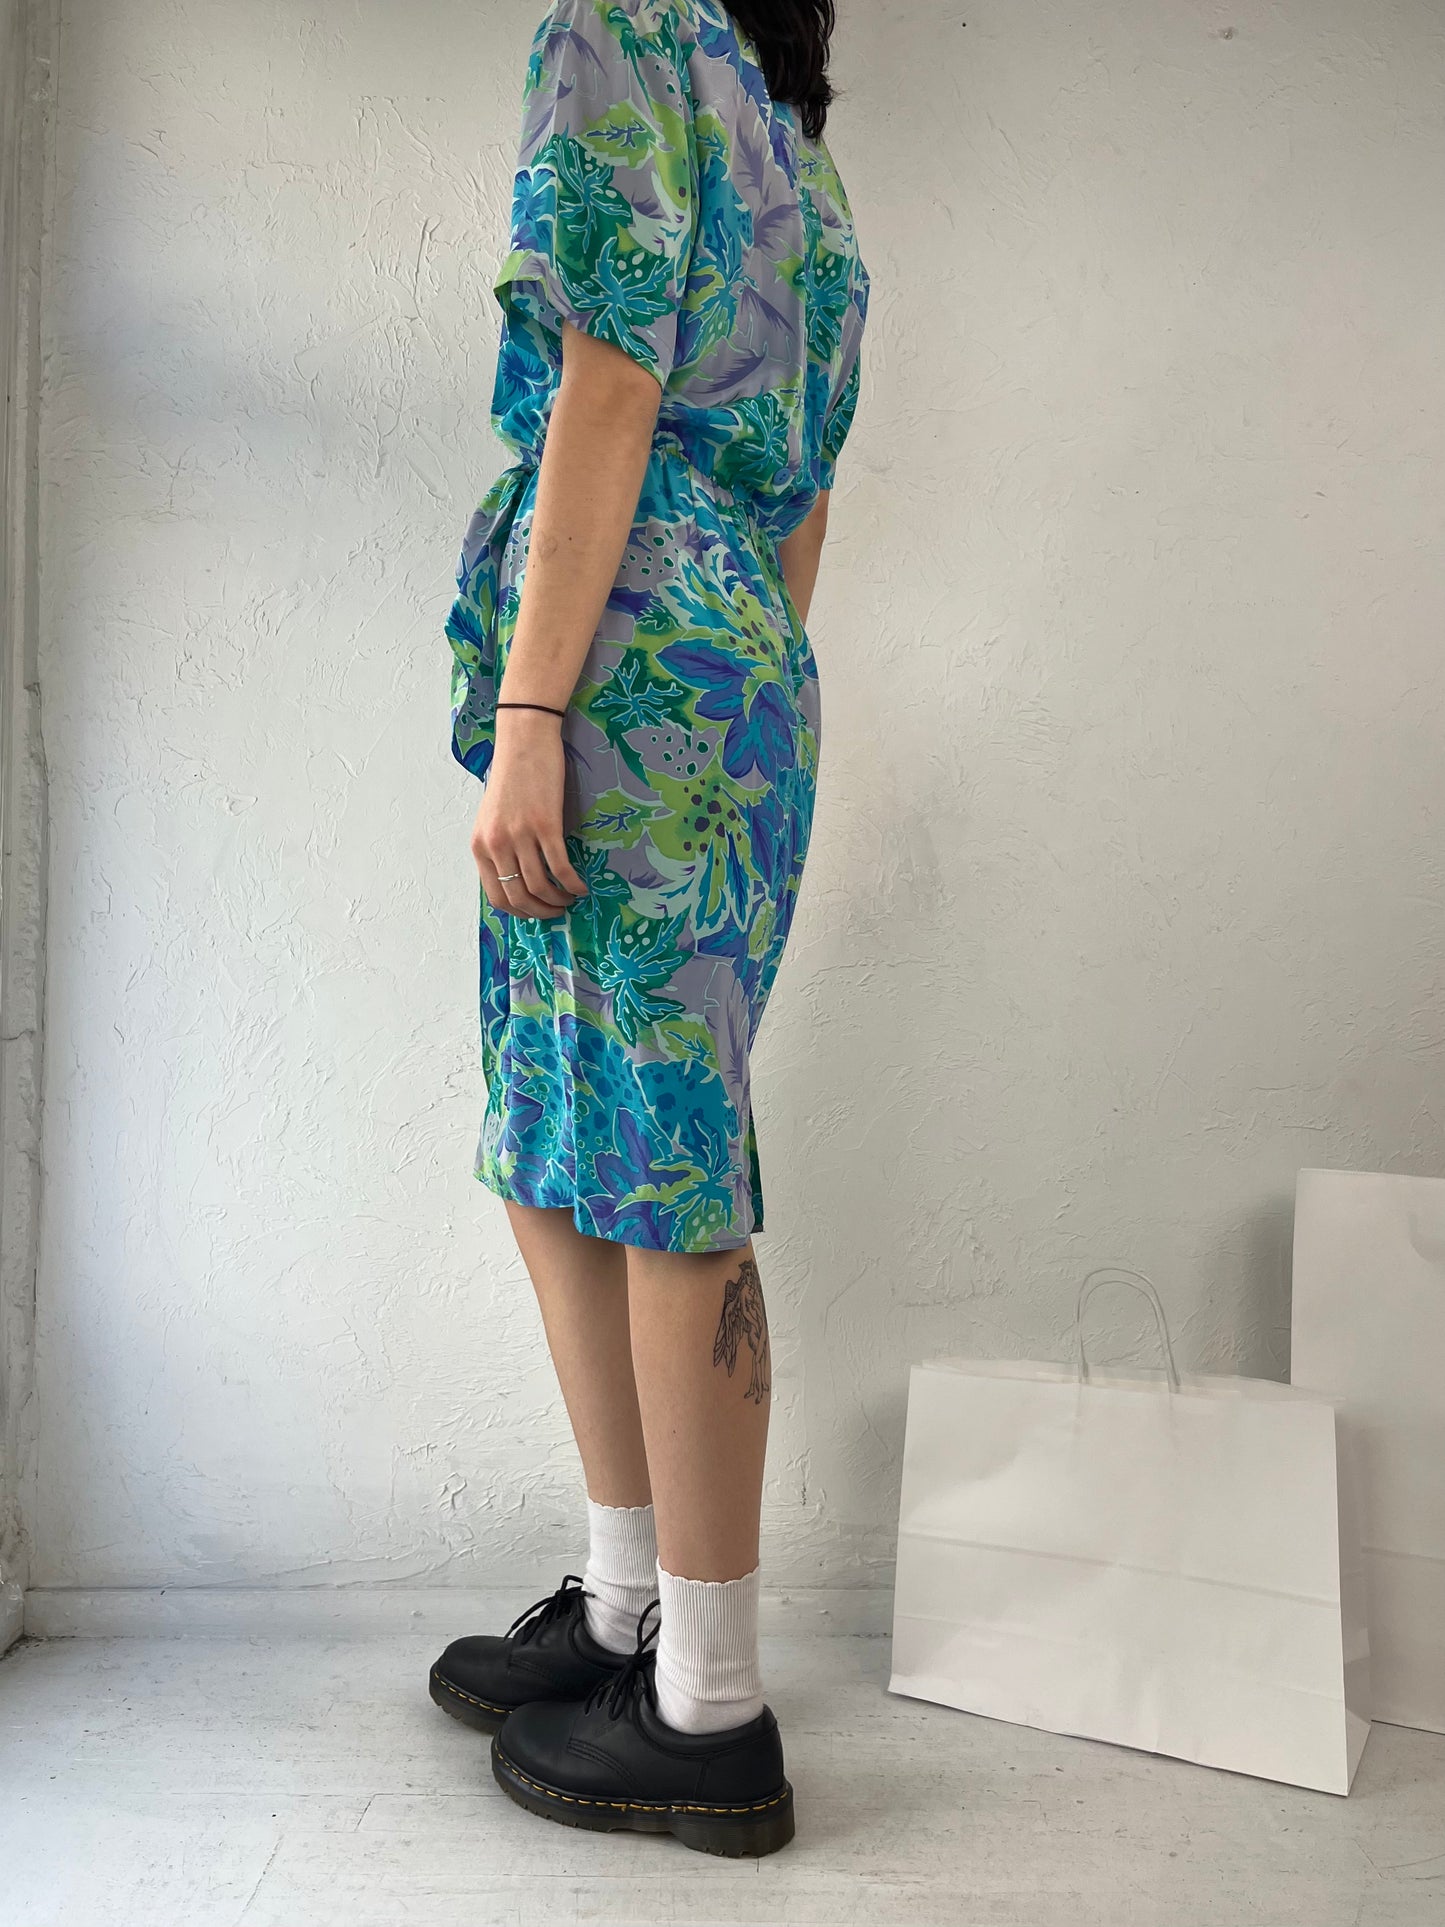 90s 'Maggy London' Blue Floral Print Silk Dress / Small